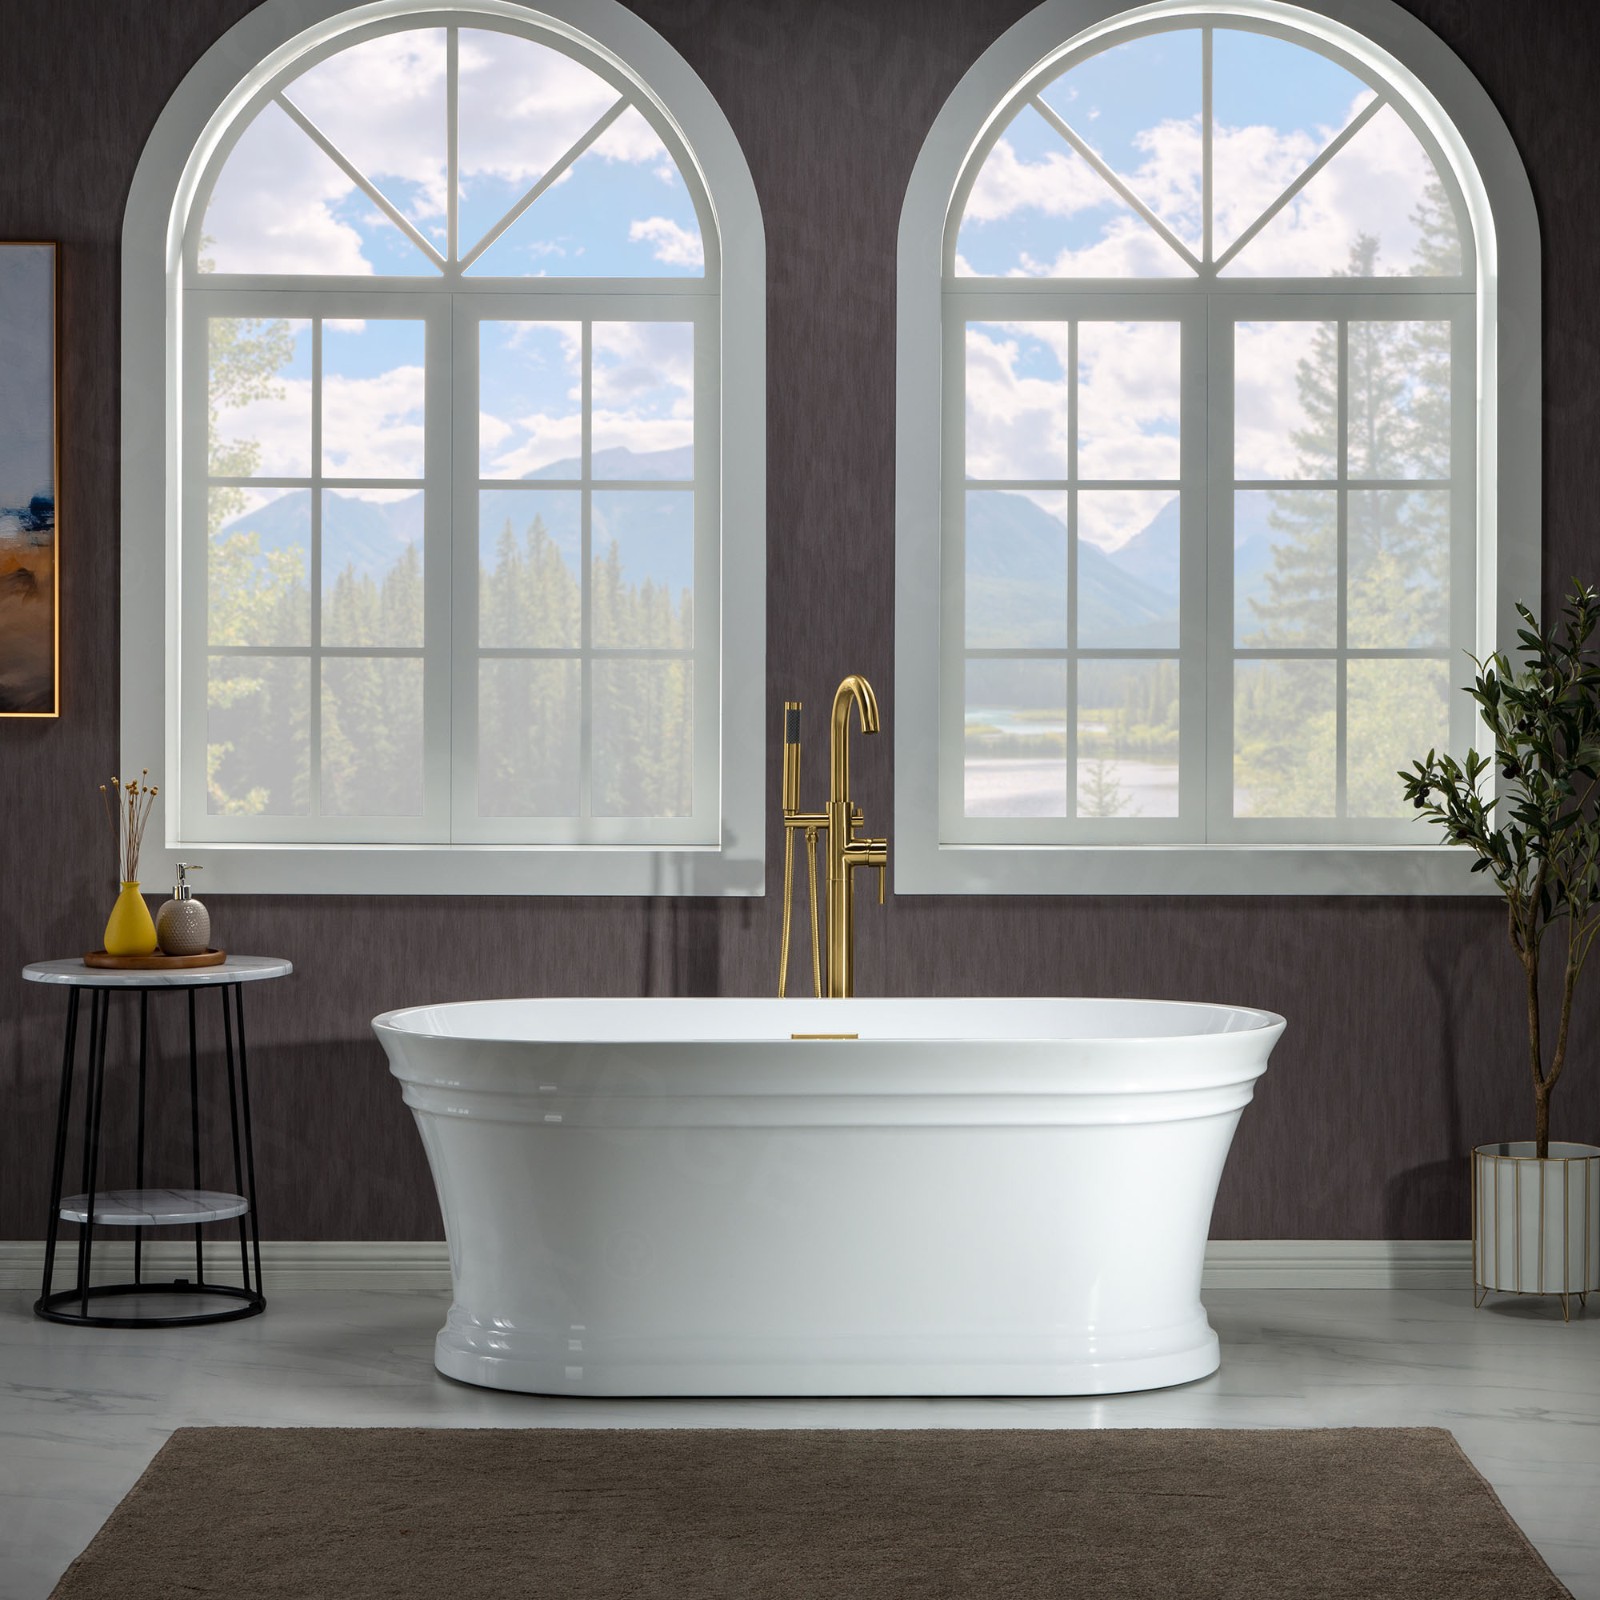  WOODBRIDGE 59 in. Freestanding Double Ended Acrylic Soaking Bathtub with Center Drain Assembly and Overflow, BTA1536/B1536, Glossy White_7803